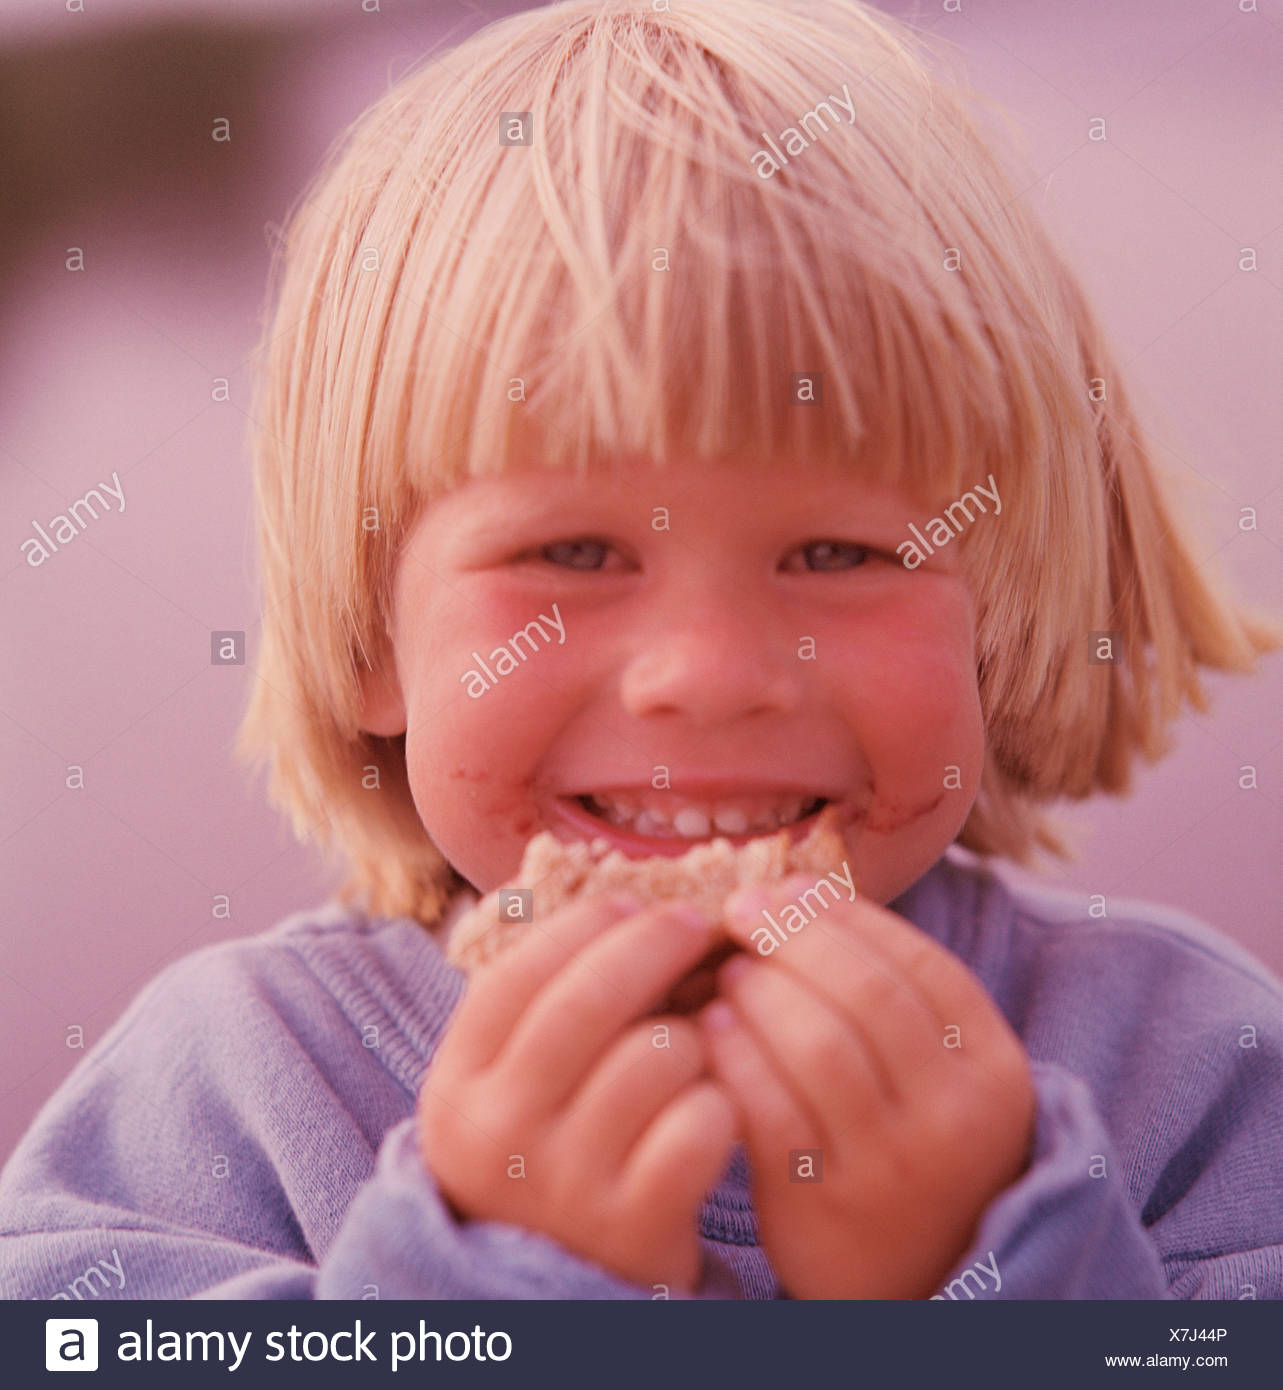 Close Up Of A Blonde Hair Blue Eyed Boy Eating Hand Food Stock